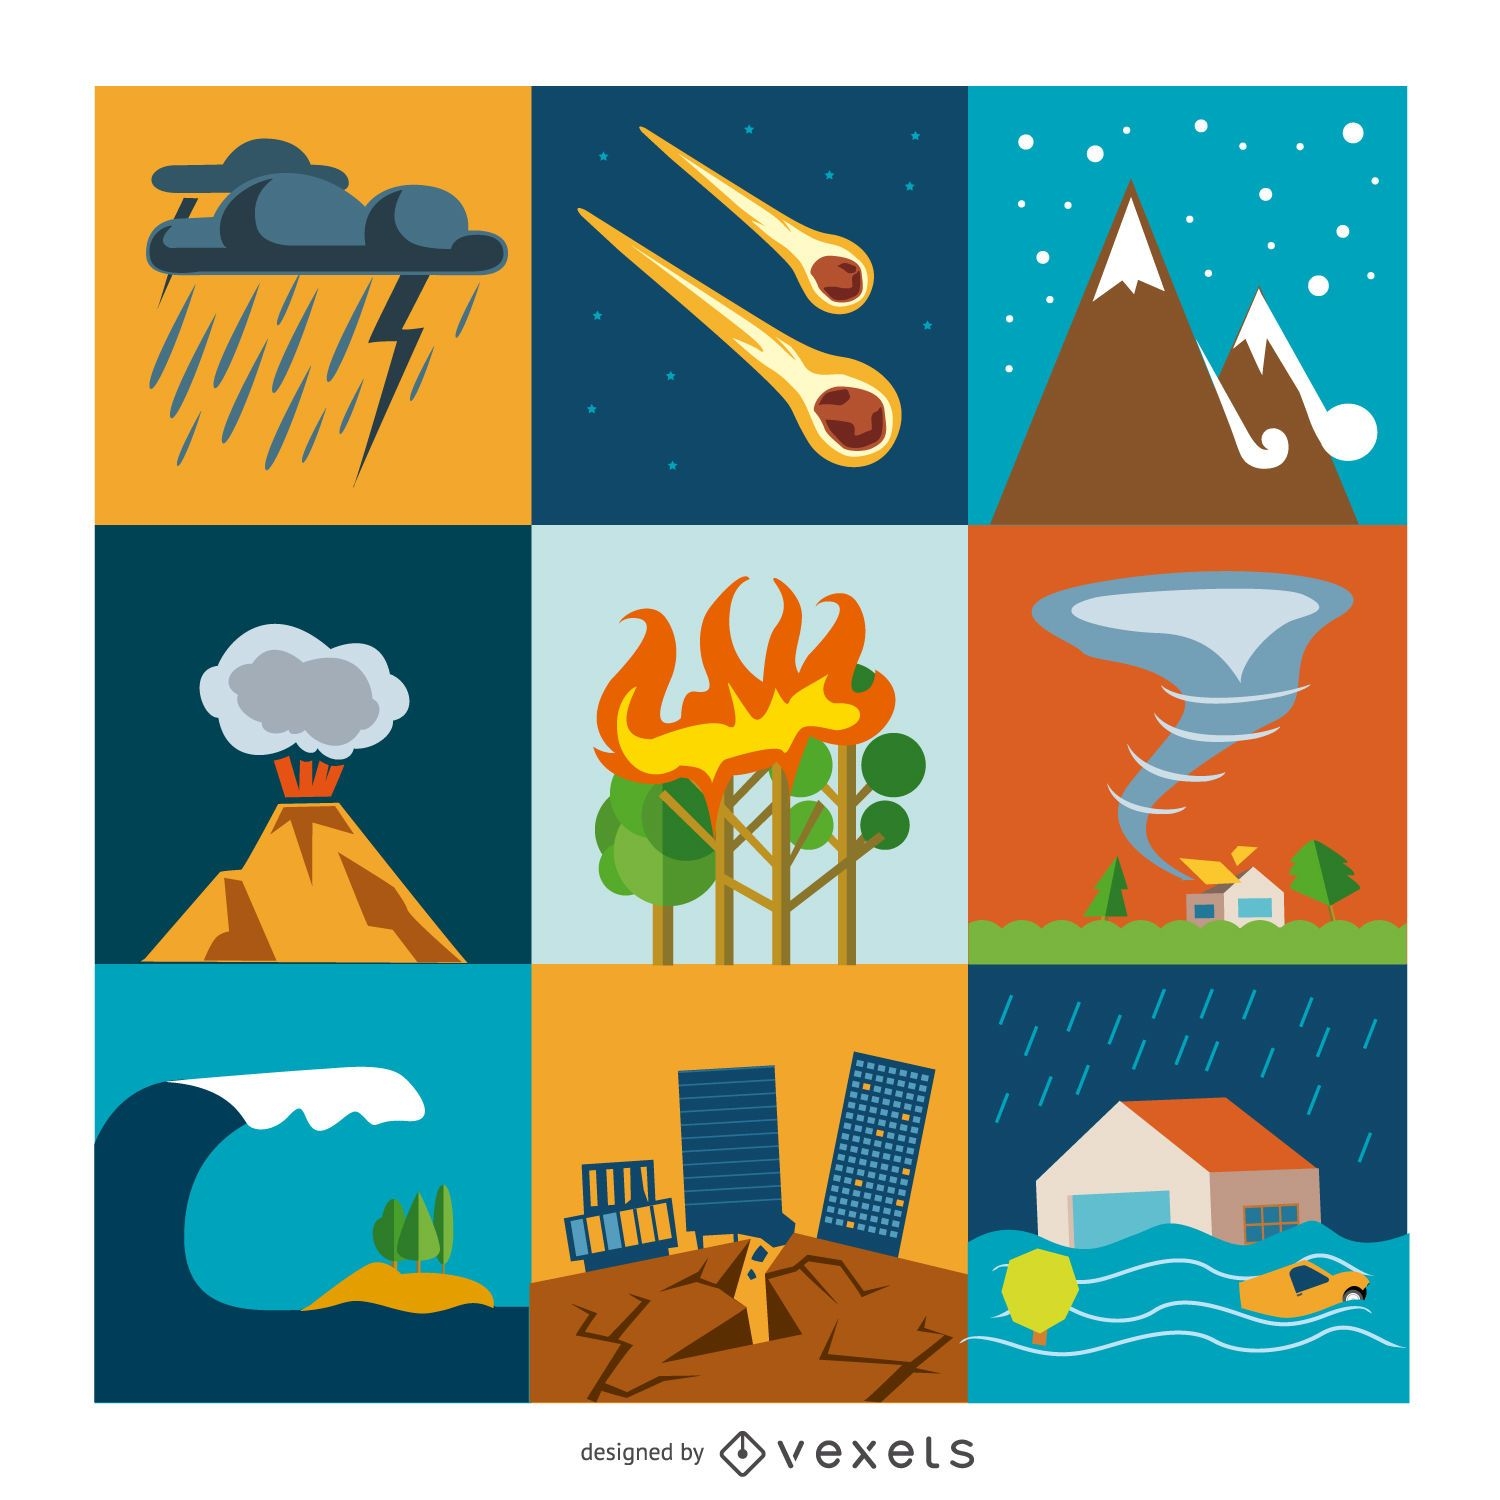 Disaster and crisis flat icon set